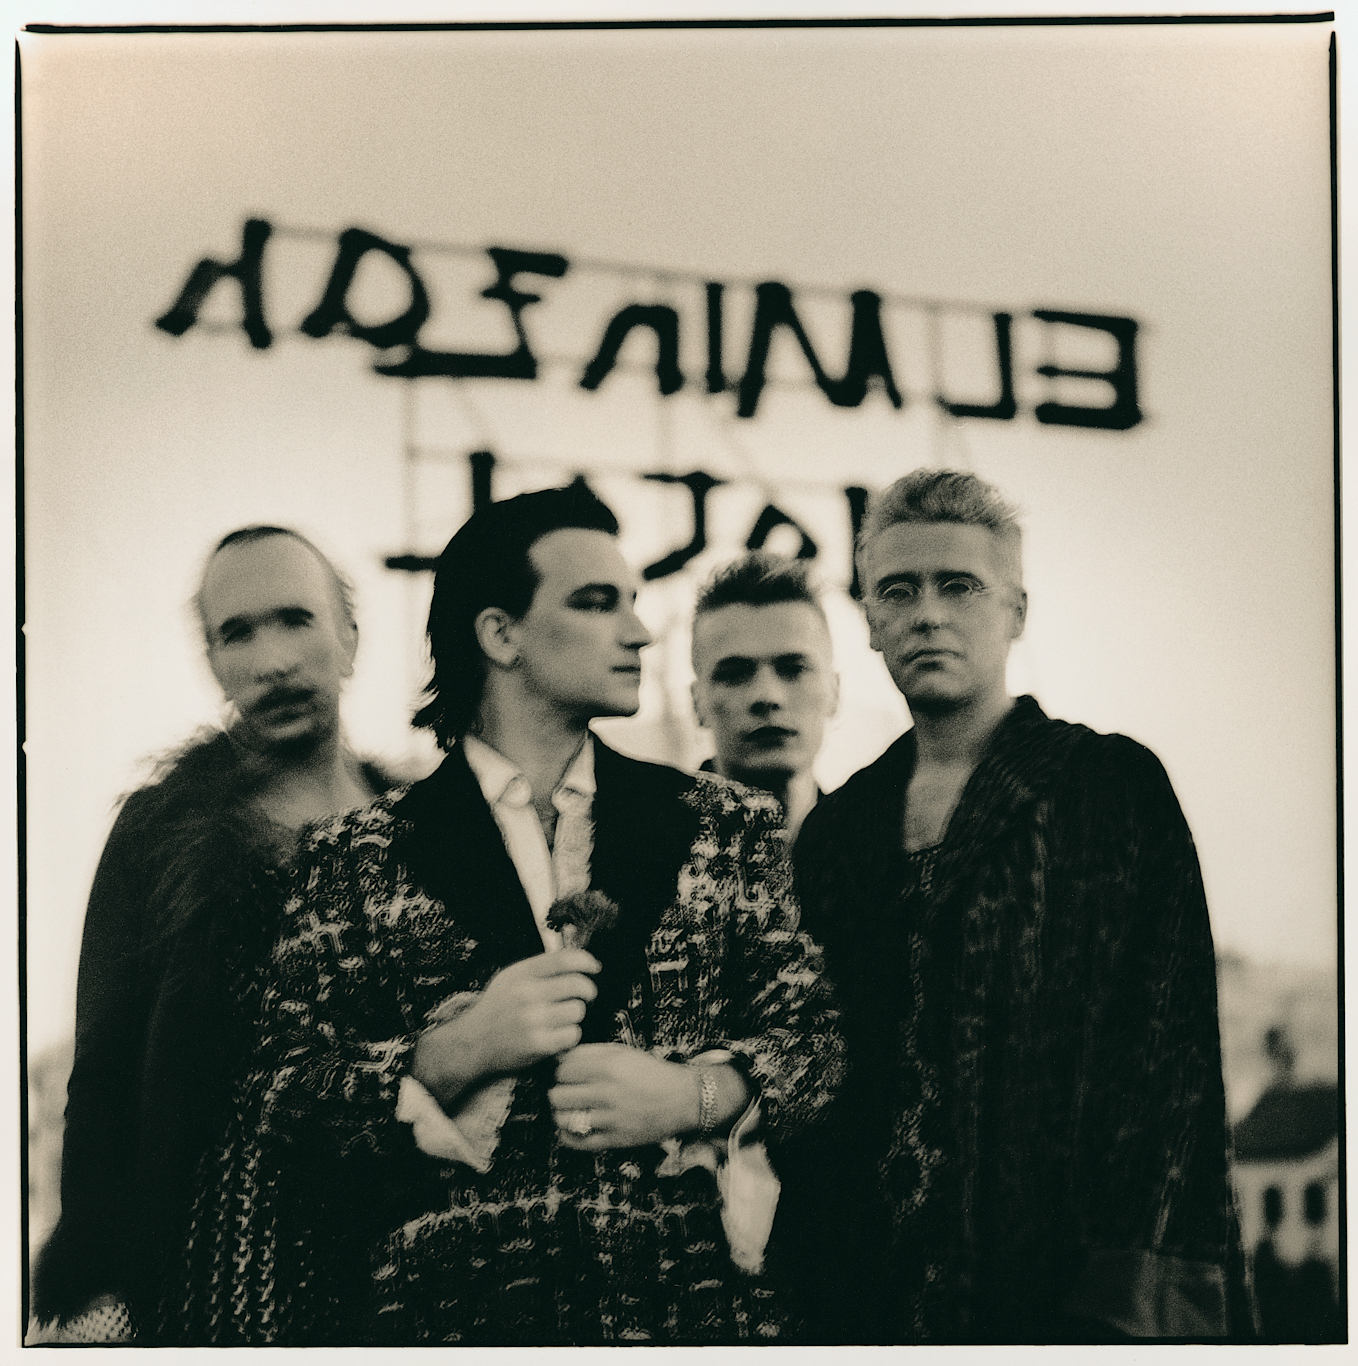 U2 announce the 30th Anniversary Edition release of their seminal album Achtung Baby 2